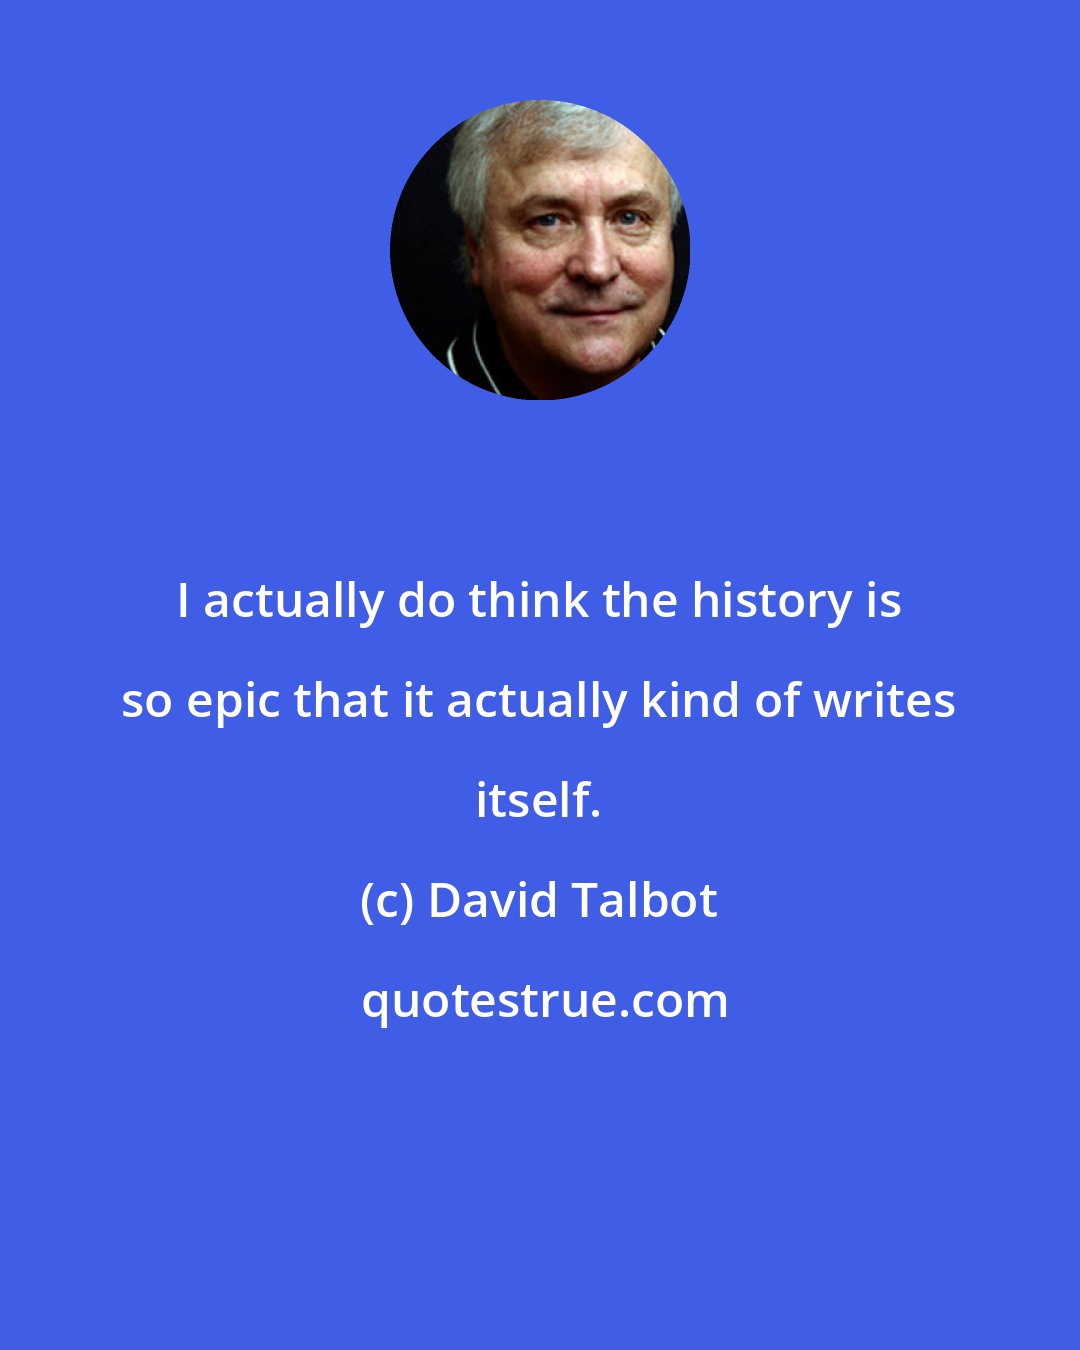 David Talbot: I actually do think the history is so epic that it actually kind of writes itself.